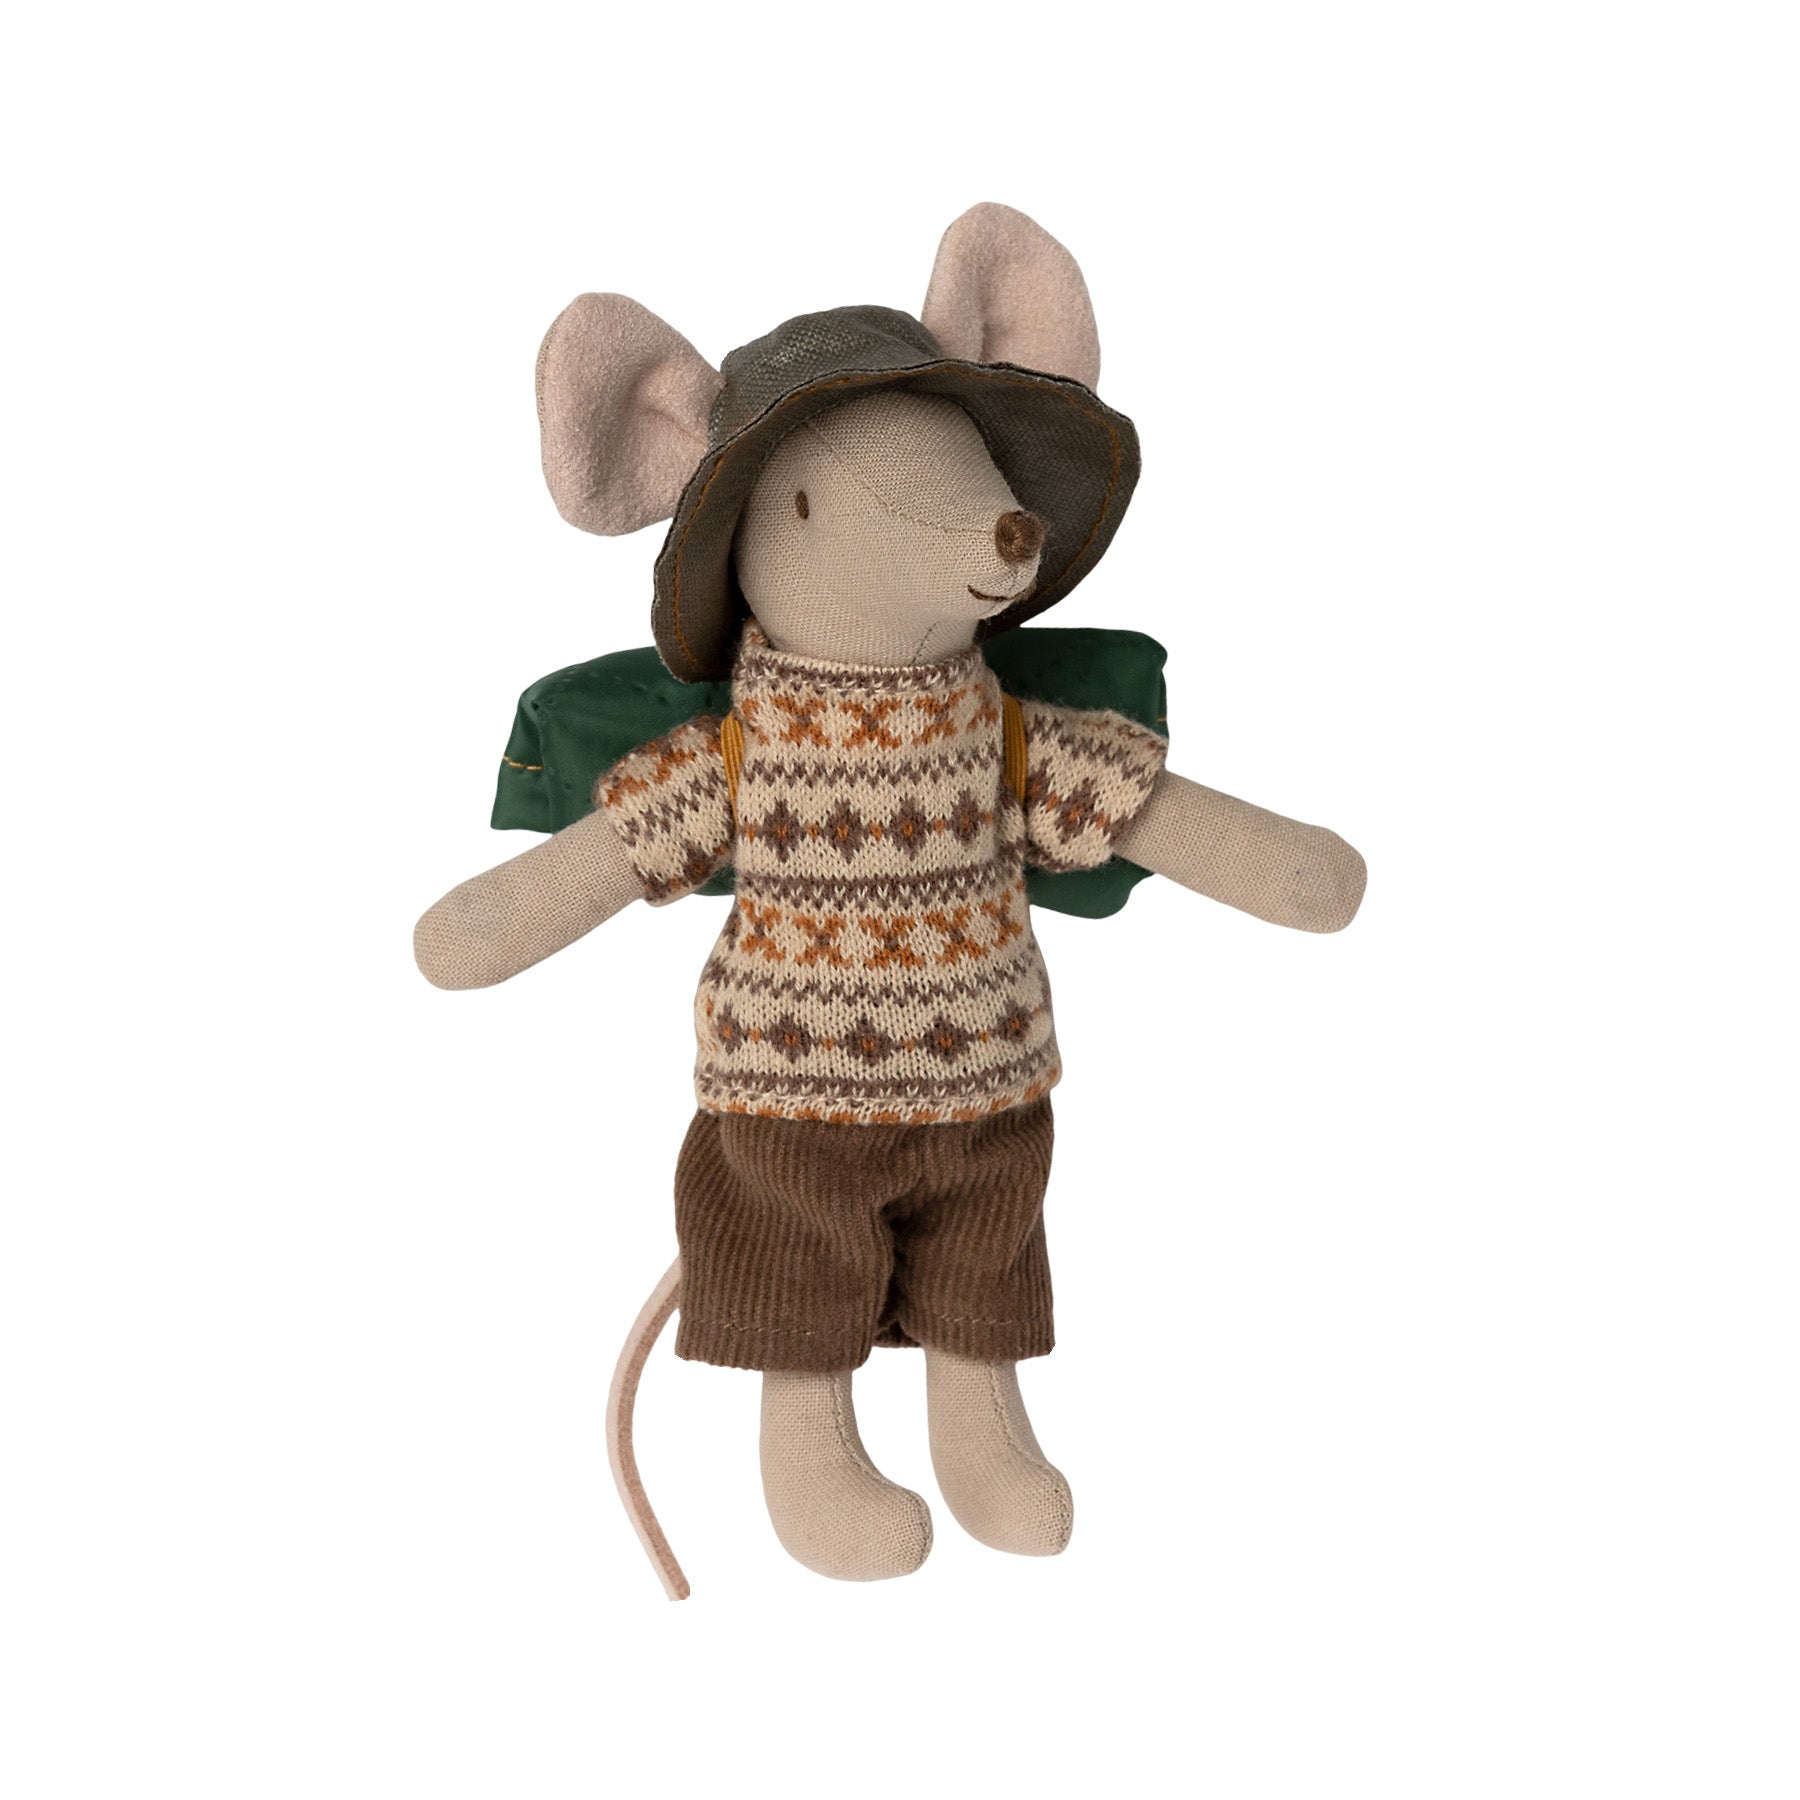 maileg hiker mouse dressed in a patterend jumper, brown shorts and hat, carrying a sleeping bag